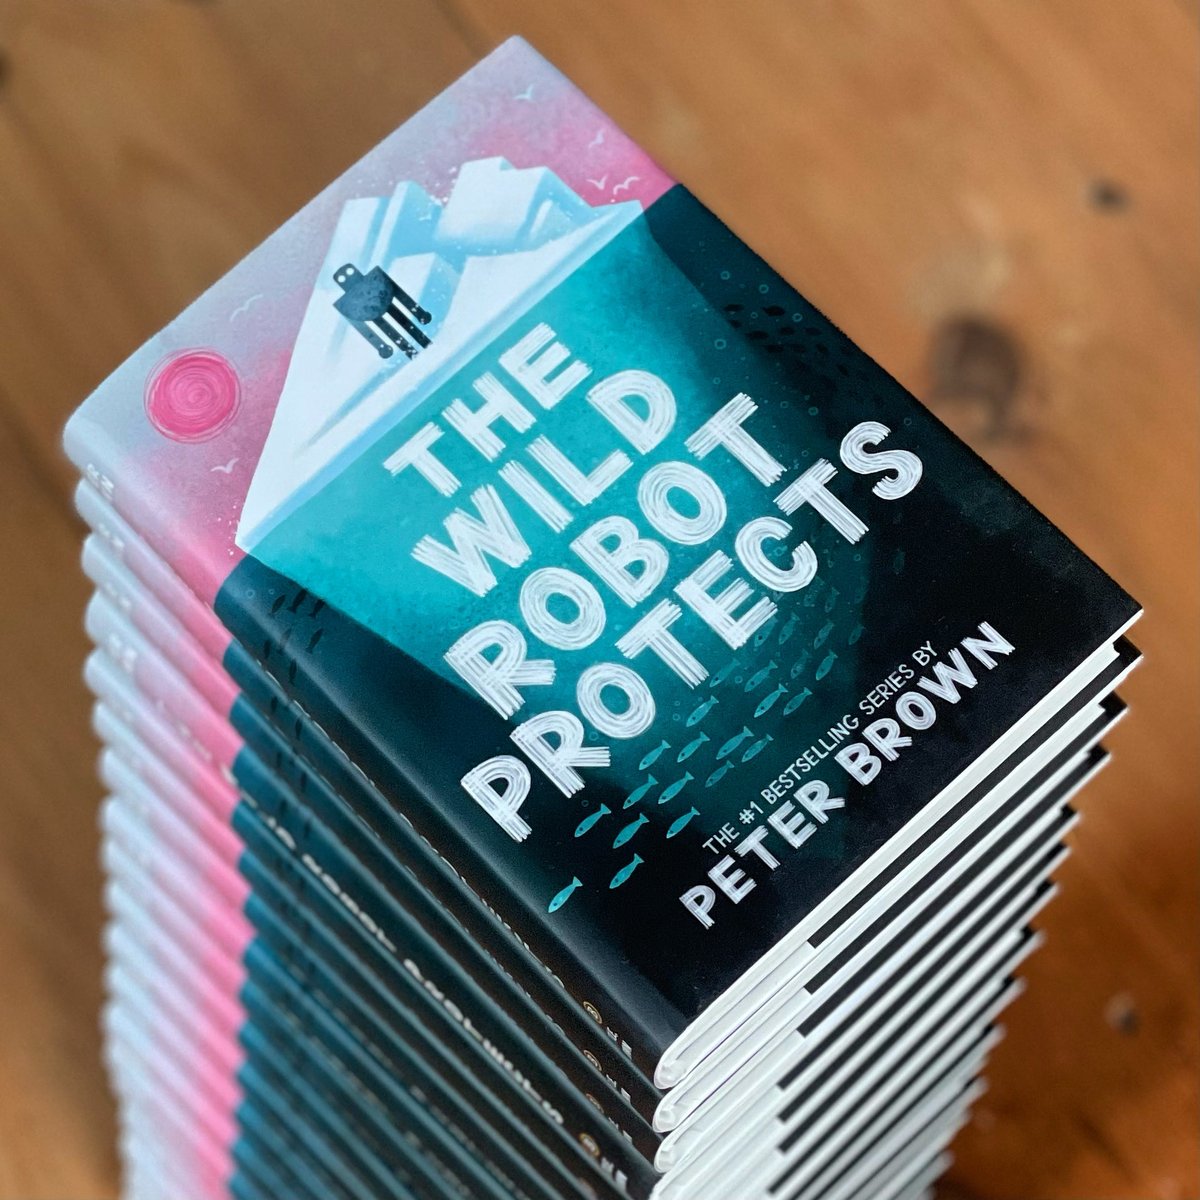 Happy Book Birthday to THE WILD ROBOT PROTECTS! I hope to see you at one of my public events in Houston TX, Salt Lake UT, Hillsboro OR, Seattle WA, Princeton NJ, Farmville VA, Toronto ON or Portland ME. Click this link for more info: peterbrownstudio.com/event-schedule/